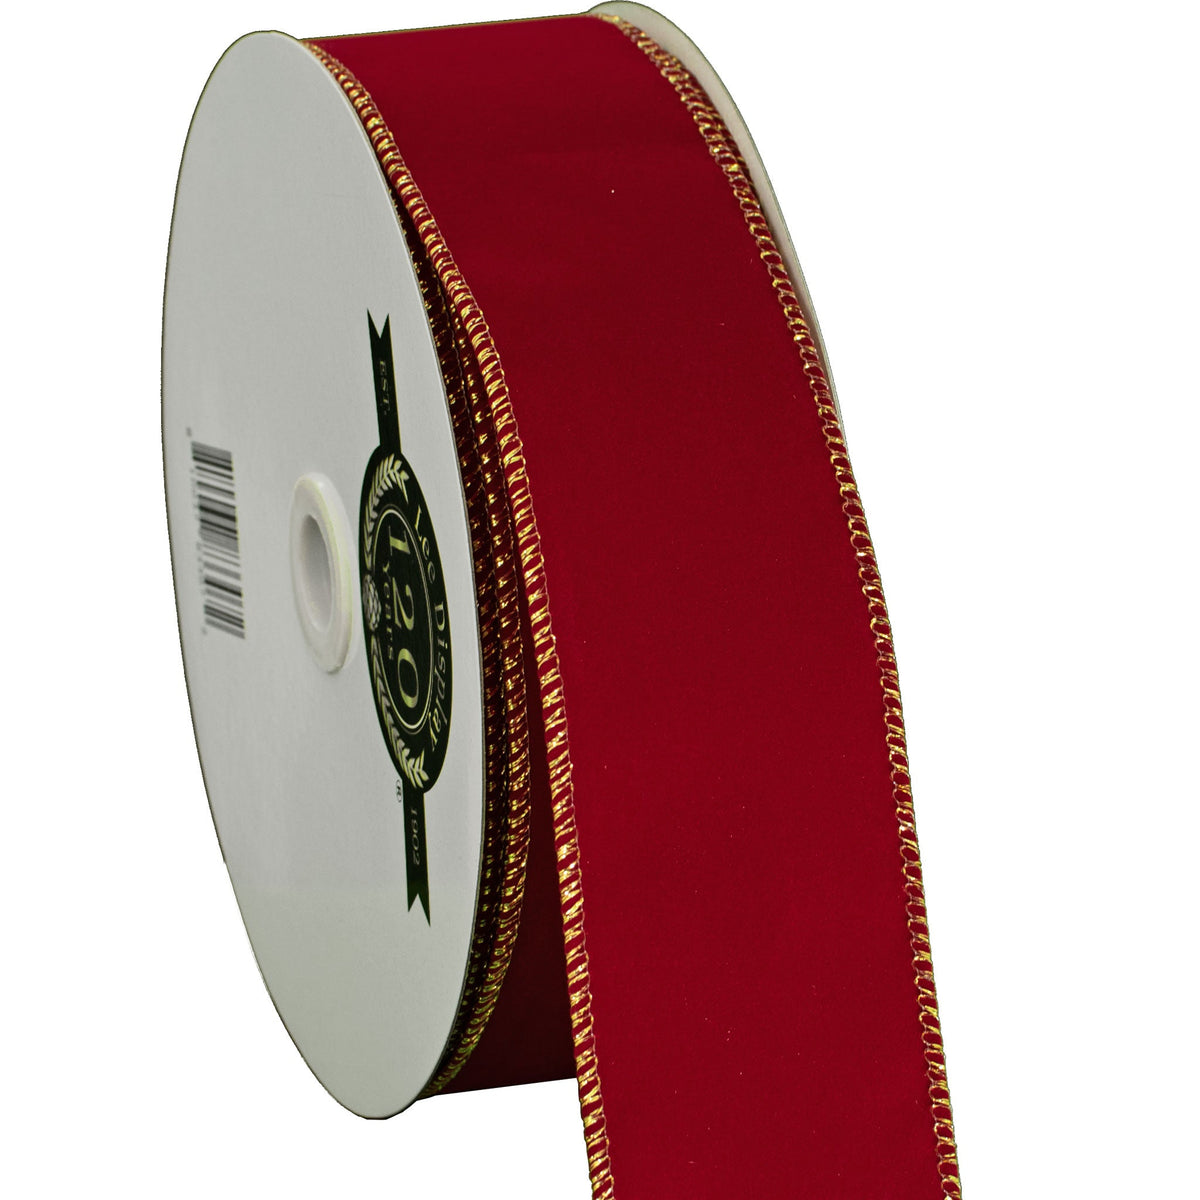 Lee Display's double-sided red velvet ribbon comes with a gold wire edge. Sold in rolls of 50 yards.